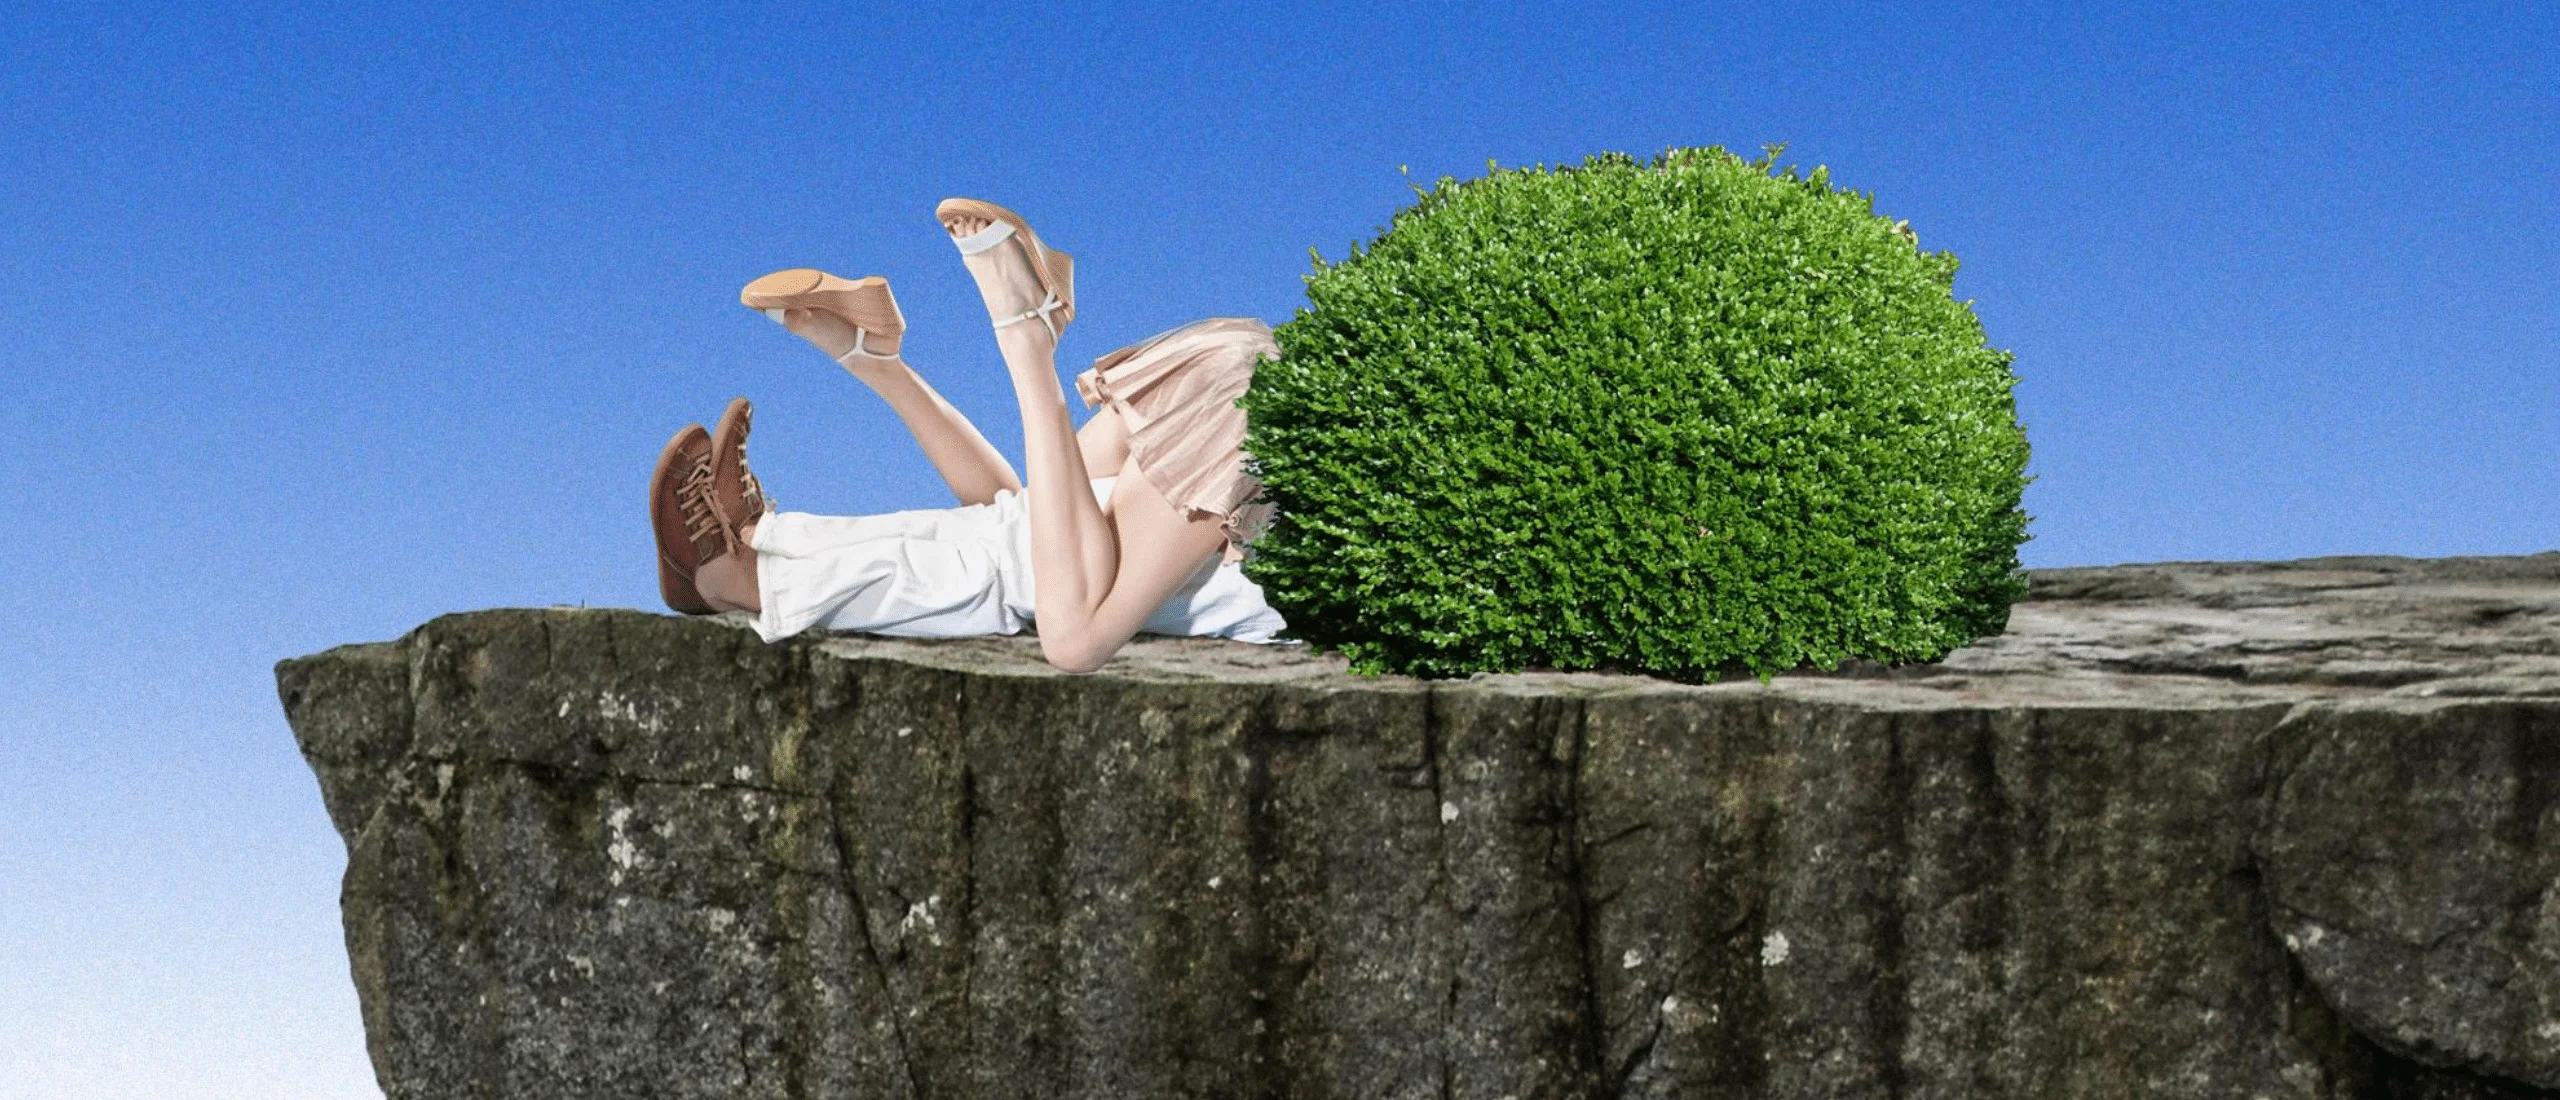 Man and woman's legs sticking out from behind a bush on top of a stump with a blue background